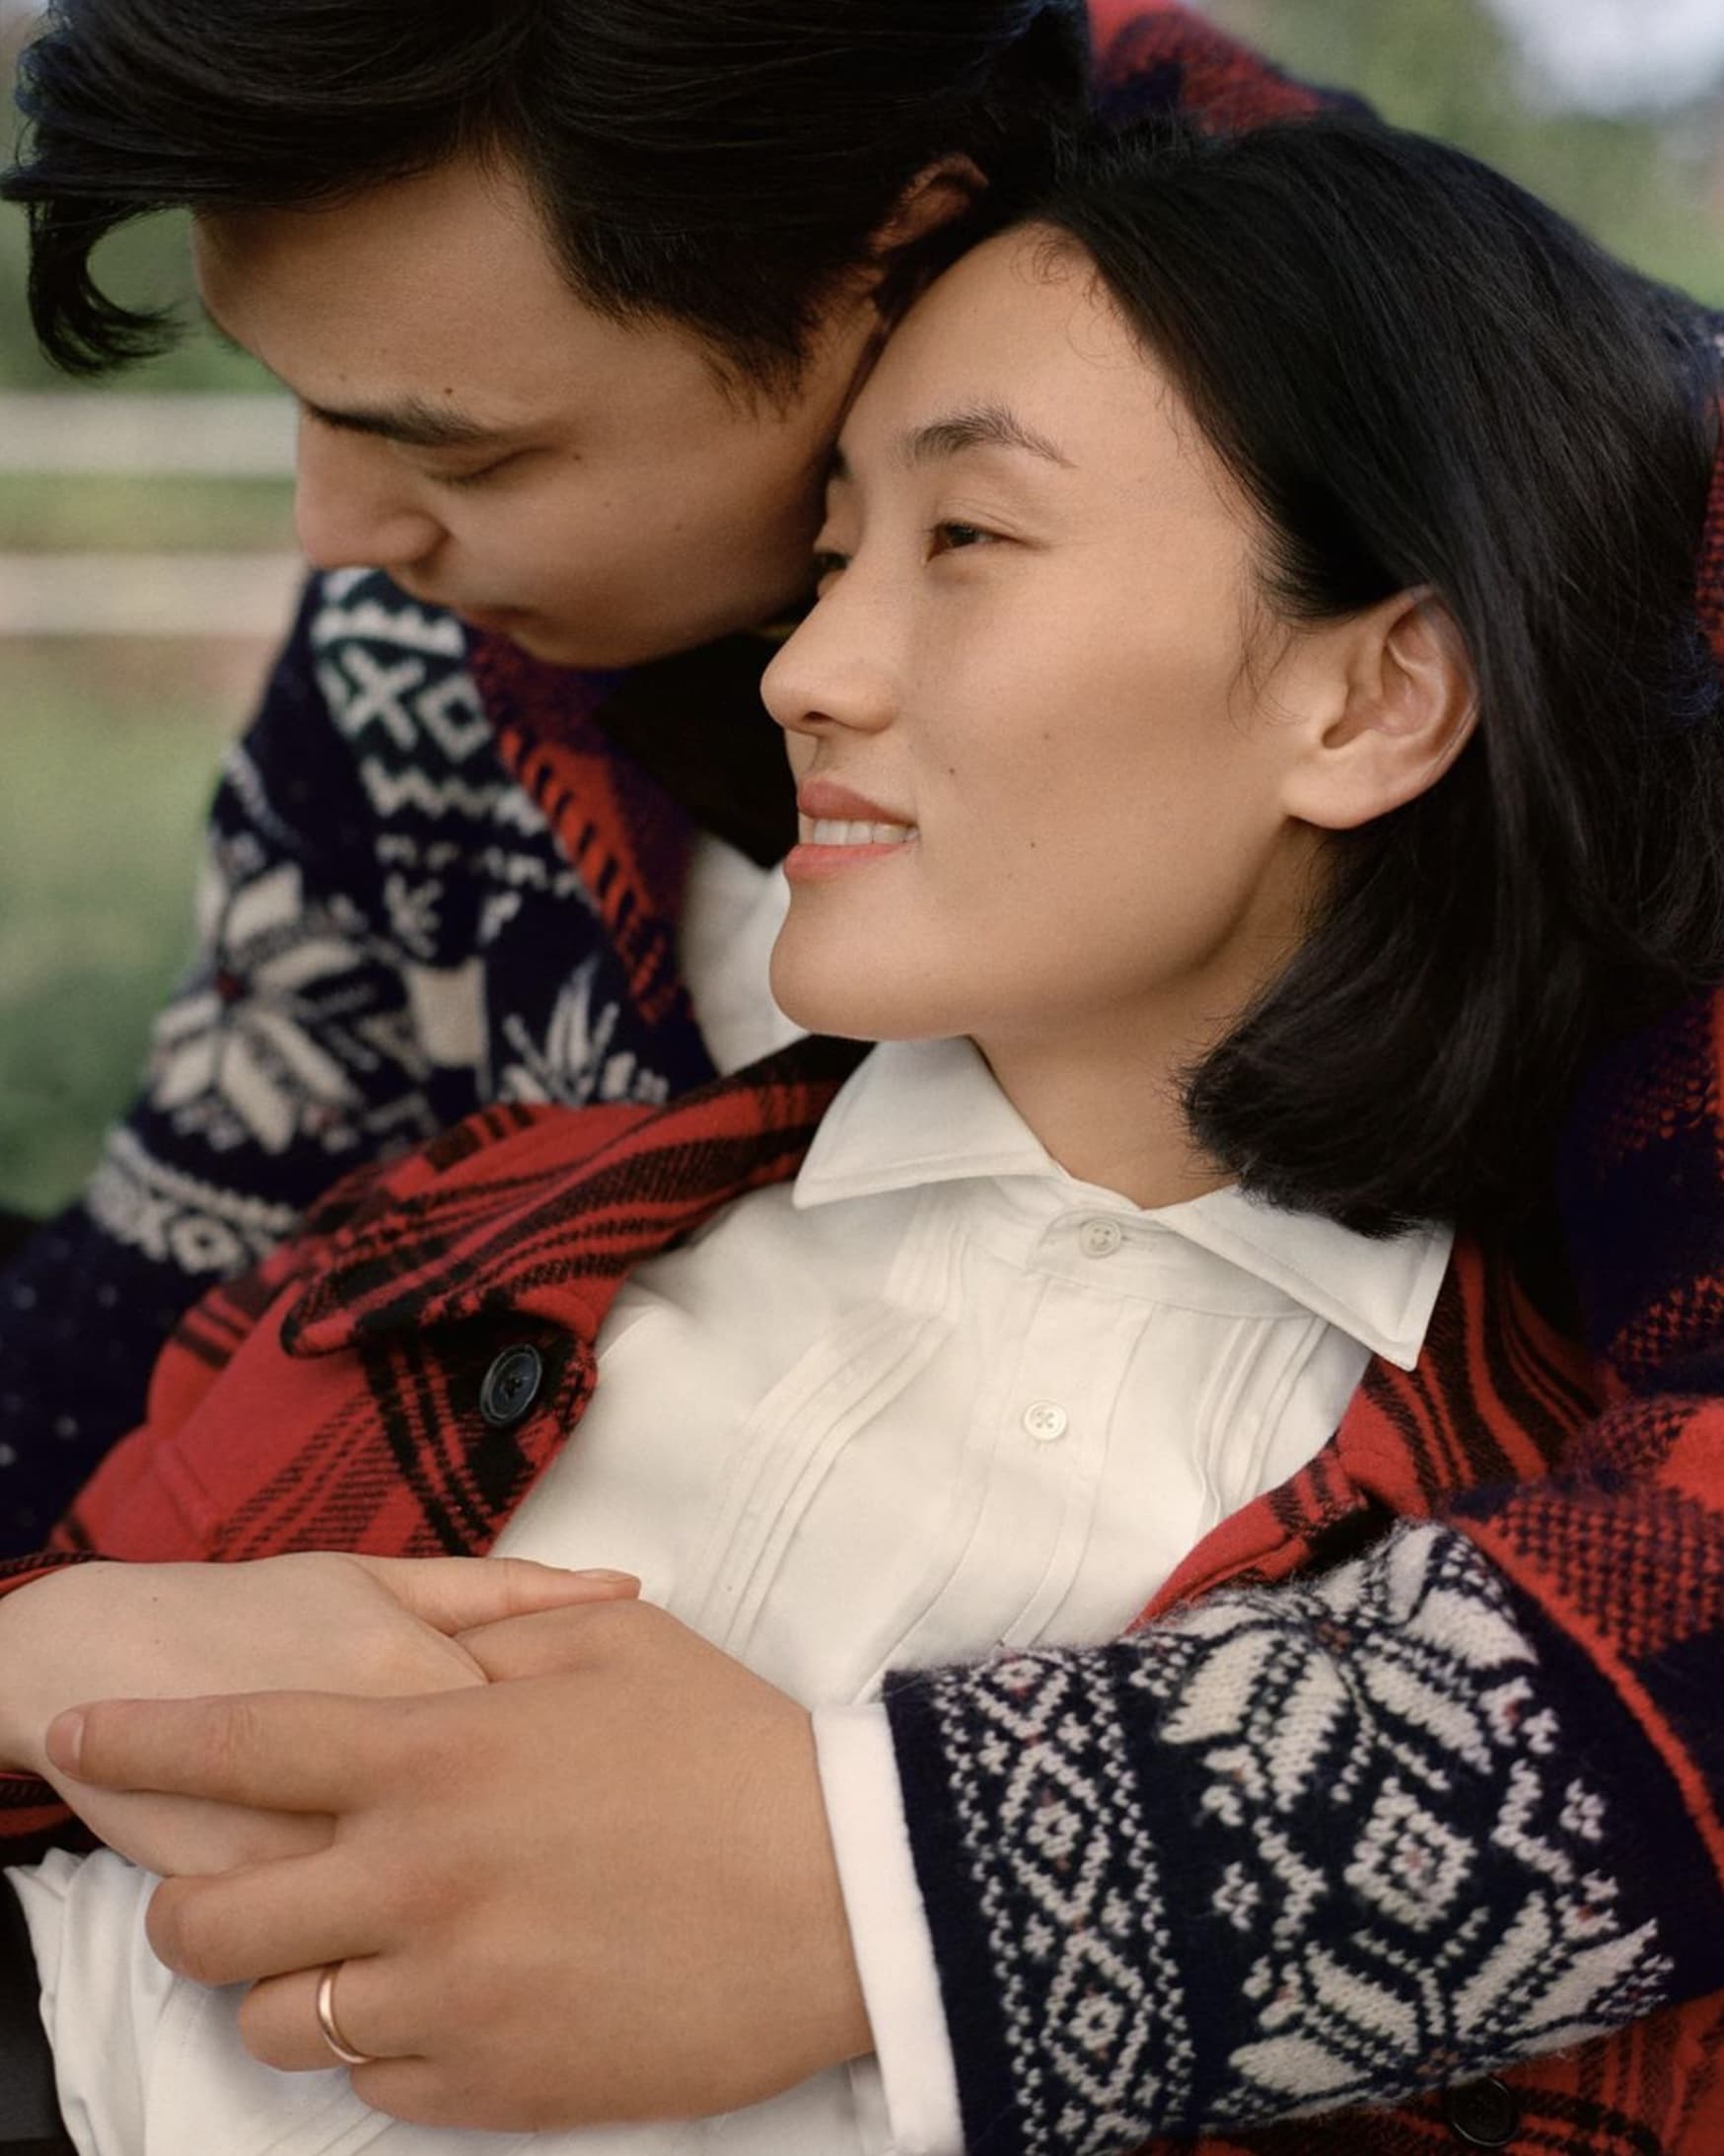 RALPH LAUREN GETS INTO THE HOLIDAY SPIRIT WITH NEW CAMPAIGN - MR Magazine